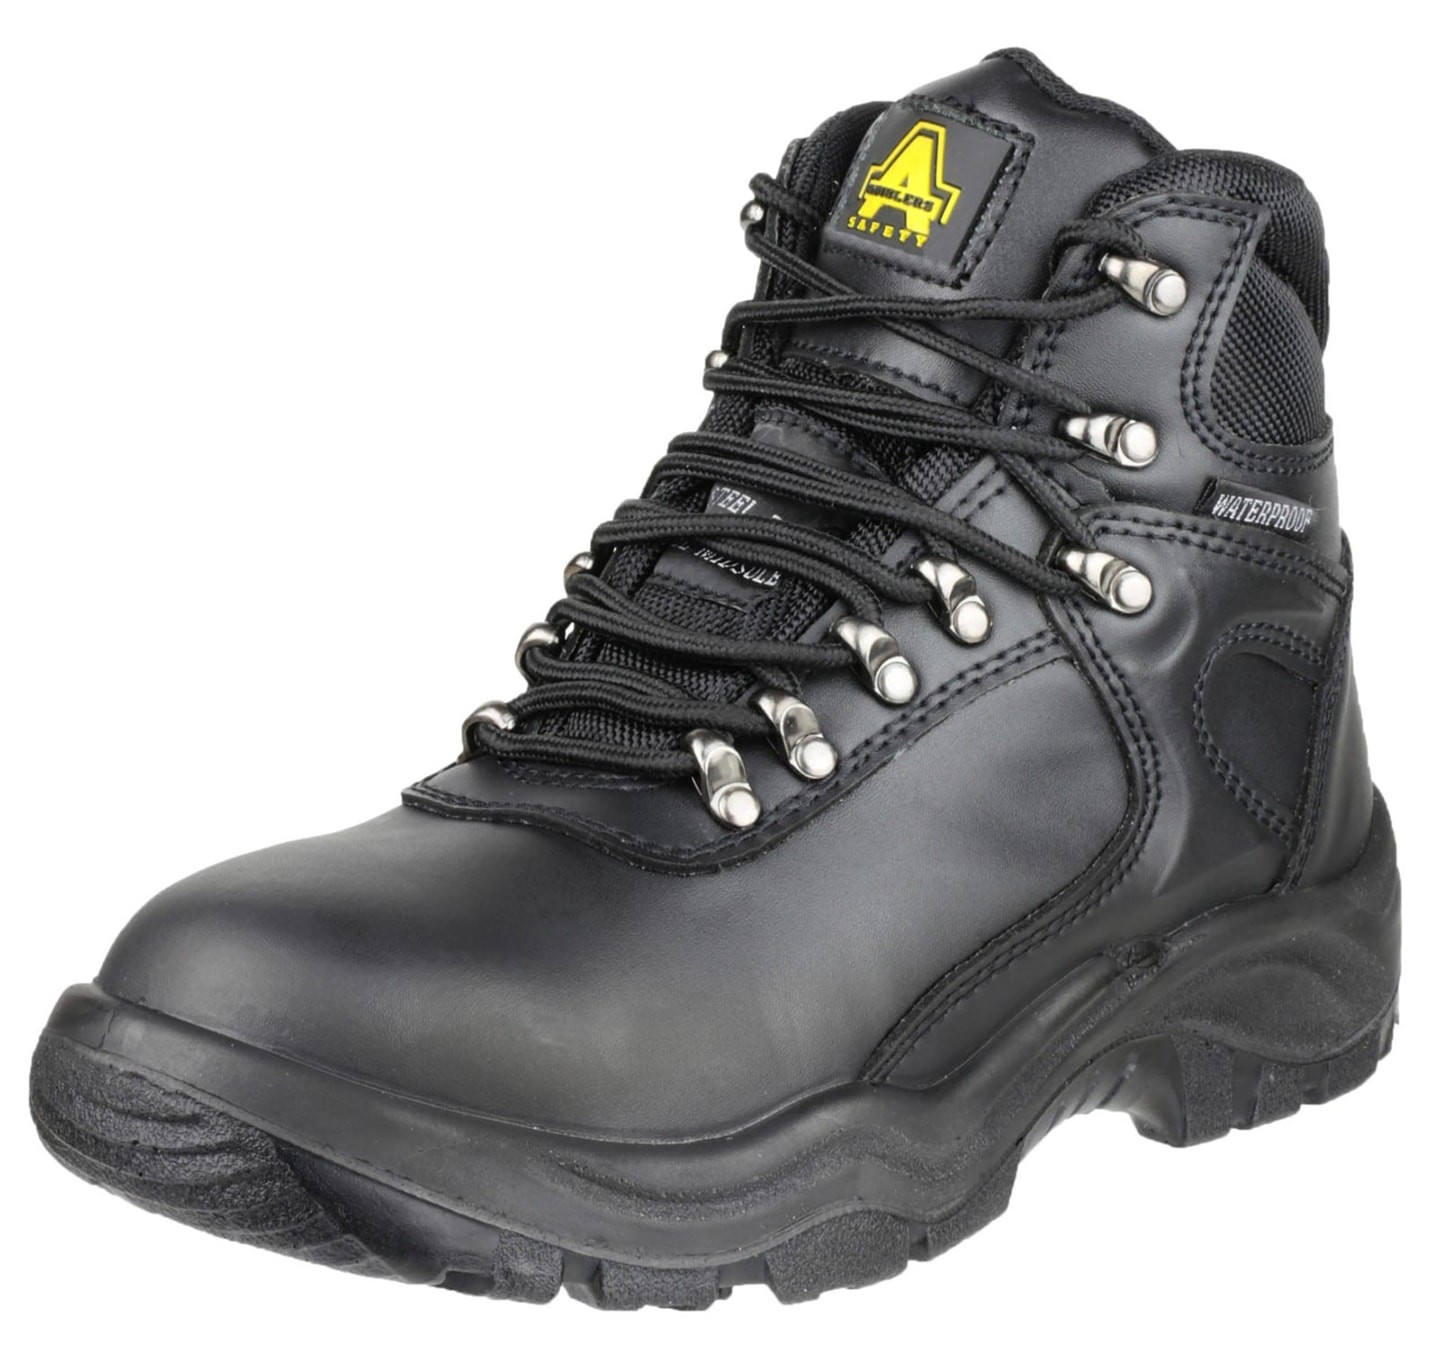 FS218 Waterproof Lace Up Safety Boot - Industrial Workwear